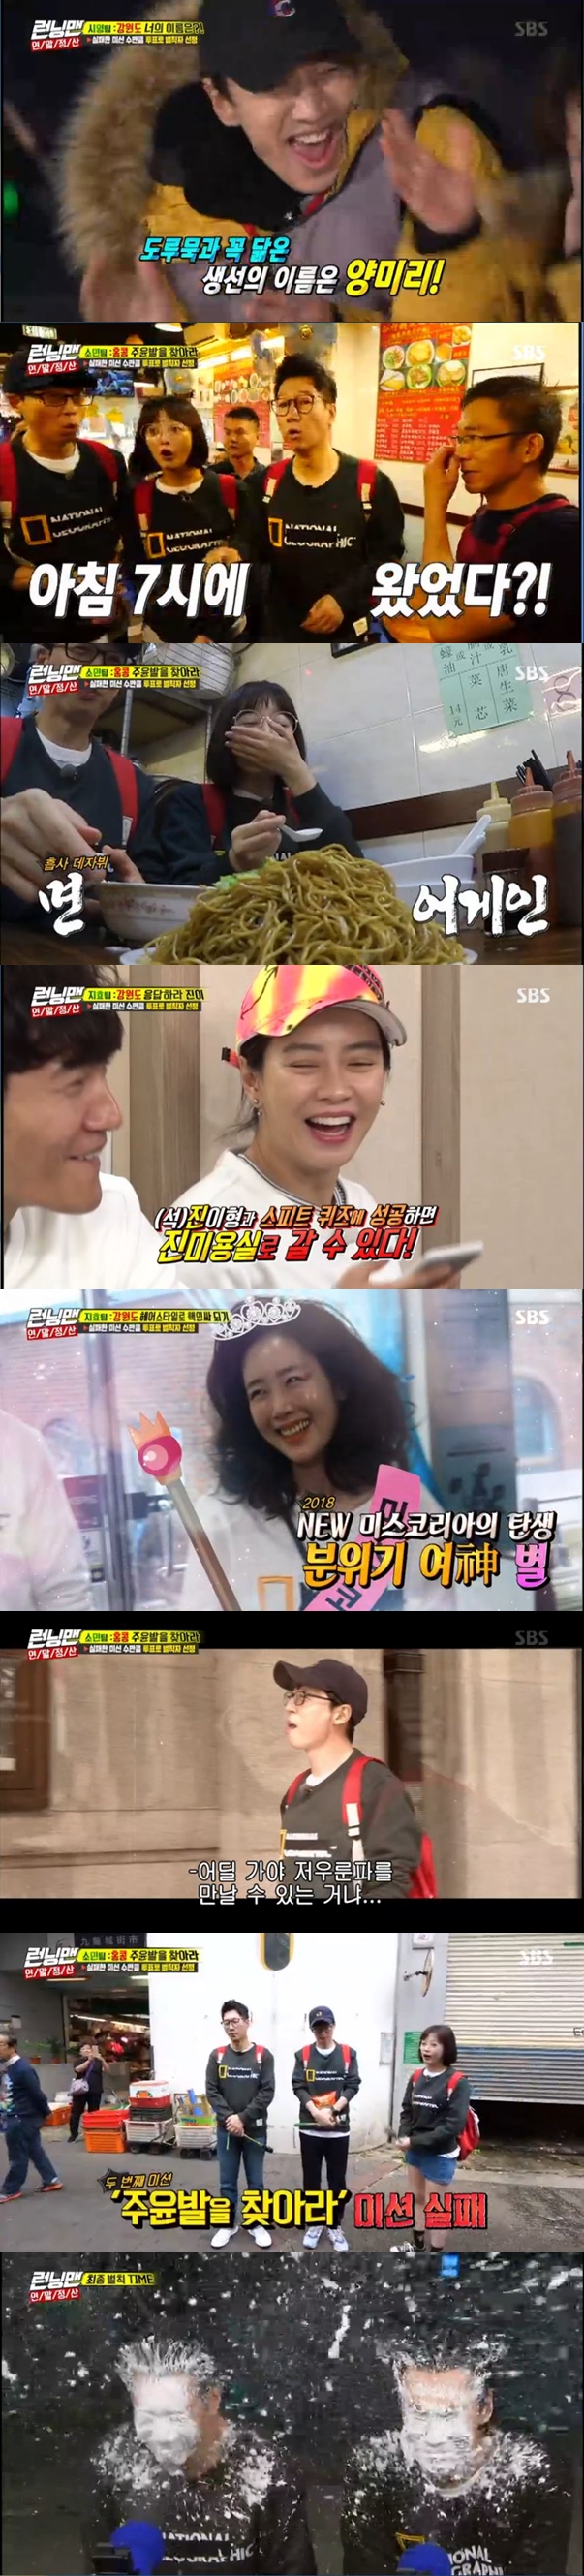 The overseas mission jinx of Jeon So-min Yoo Jae-Suk Ji Suk-jin followed.On the afternoon of the 23rd, SBS entertainment program Running Man broadcasted the last round of year-end settlement race.Lee Kwang-soos betrayal instincts remained unchanged; Lee Si-youngs team got into the car to do a steal-and-drill fishing from 3am.I was born again, Lee Kwang-soo, who got into the car, said the night before, taking out the stolen voting rights to Yang Se-chan.However, Lee Si-young took Lee Kwang-soos right to vote, saying, I can not believe it, I will have the right to vote. Lee Kwang-soo was unfair and returned the right to vote and laughed.The commission of Lee Si-youngs team was smooth.Lee Si-young, who picked a relatively easy-to-catch dorumuk as a mission fish, succeeded in missioning shortly after getting on the ship.In addition, with the help of the captain, the additional mission was hit with fish similar to Dorumuk, and the mission was completed the fastest among the three teams.Haha sighed with relief, saying, I am glad that the end is finished well.The Jeon So-min team, who failed to get out of cotton hell at Hong Kong, has been hit by a hardship since morning.The crew asked Ji Suk-jin, who was sleeping in the morning, What reminds me most when Hong Kong is, and Ji Suk-jin replied Chow Yun-fat with a non-dreaming state.The crew then gave the team, Jeon So-min, who gathered in the morning, an additional mission to find a Chow Yun-fat.The Jeon So-min team was embarrassed at first when they heard the mission, but soon they found out the noodle collection that Chow Yun-fat often visited and headed to the place with excitement.The Jeon So-min team did not get out of the cotton hell at the restaurant where they visited to meet Chow Yun-fat.When Ji Suk-jin arrived at the restaurant, he asked his owner, When did Chow Yun-fat come? And the owner replied, It comes at 7 oclock every day.Yoo Jae-Suk then asked, What is the food that Chow Yun-fat often eats? And the owner recommended porridge and fried noodles.Yoo Jae-Suk said, I will do my best for personal reasons. However, the boss gave me fried noodles as a service, and the three people could not easily take the milk to the noodles.After eating a Chow Yun-fat set at the restaurant, the three headed to the Milky home where Chow Yun-fat often goes.But even at the Milkty home they were headed for, Chow Yun-fat didnt come.Jeon So-min used the hashtag to find a souffle tart home where Chow Yun-fat often goes.But there was also news that Chow Yun-fat had not come for a month, and the three were frustrated.The restaurant owner who went to the morning called Chow Yun-fat to the nearby Chinese medicine room, and the phone was filled with good news.The three rushed to the Chow Yun-fat, where the restaurant owner said they did not meet Chow Yun-fat again due to a gap.Eventually, the three men were unable to meet Chow Yun-fat and boarded their return flight.Meanwhile, Ji Hyo team also performed additional missions. The production team gave Ji Hyo team a mission to find a hair salon with an entertainers name and call the person to succeed in the Speed ​​Quiz.The star found a jin beauty salon in Sokcho, and Kim Jong-kook insisted, We call it jin-yi. The production team suggested, I call it jin-yi-hyung and I admit it if I answer yes.Ji Suk-jin answered the call of Kim Jong-kook with a Baro yes and entered the Baro Speed quiz.But Ji Suk-jin was not in trouble.Ji Hyo team then called Ju Byeong-jin, who was nervous by calling his immediate senior Ju Byeong-jin.Ju Byeong-jin said Wait a minute, Im teeing as soon as he got the call, further straining Yang Se-chan.However, Ju Byeong-jin, who came back with a tee shot, hit six problems in 35 seconds and led Ji Hyo team to mission success.Ji Hyo team headed to Jin Beauty Shop and completed the mission after the star and Yang Se-chan had their hair with the choice of the director.The three teams that came back from the commission selected the final penalty: Lee Kwang-soo was caught stealing the right to vote from Lee Si-young again ahead of the vote.The Jeon So-min team, which failed all of the commissions, had the least voting rights and voted for Ji Suk-jin.Eventually, Lee Kwang-soo and Ji Suk-jin were penalized for receiving the most votes; the two pledged later, saying, We will get revenge.